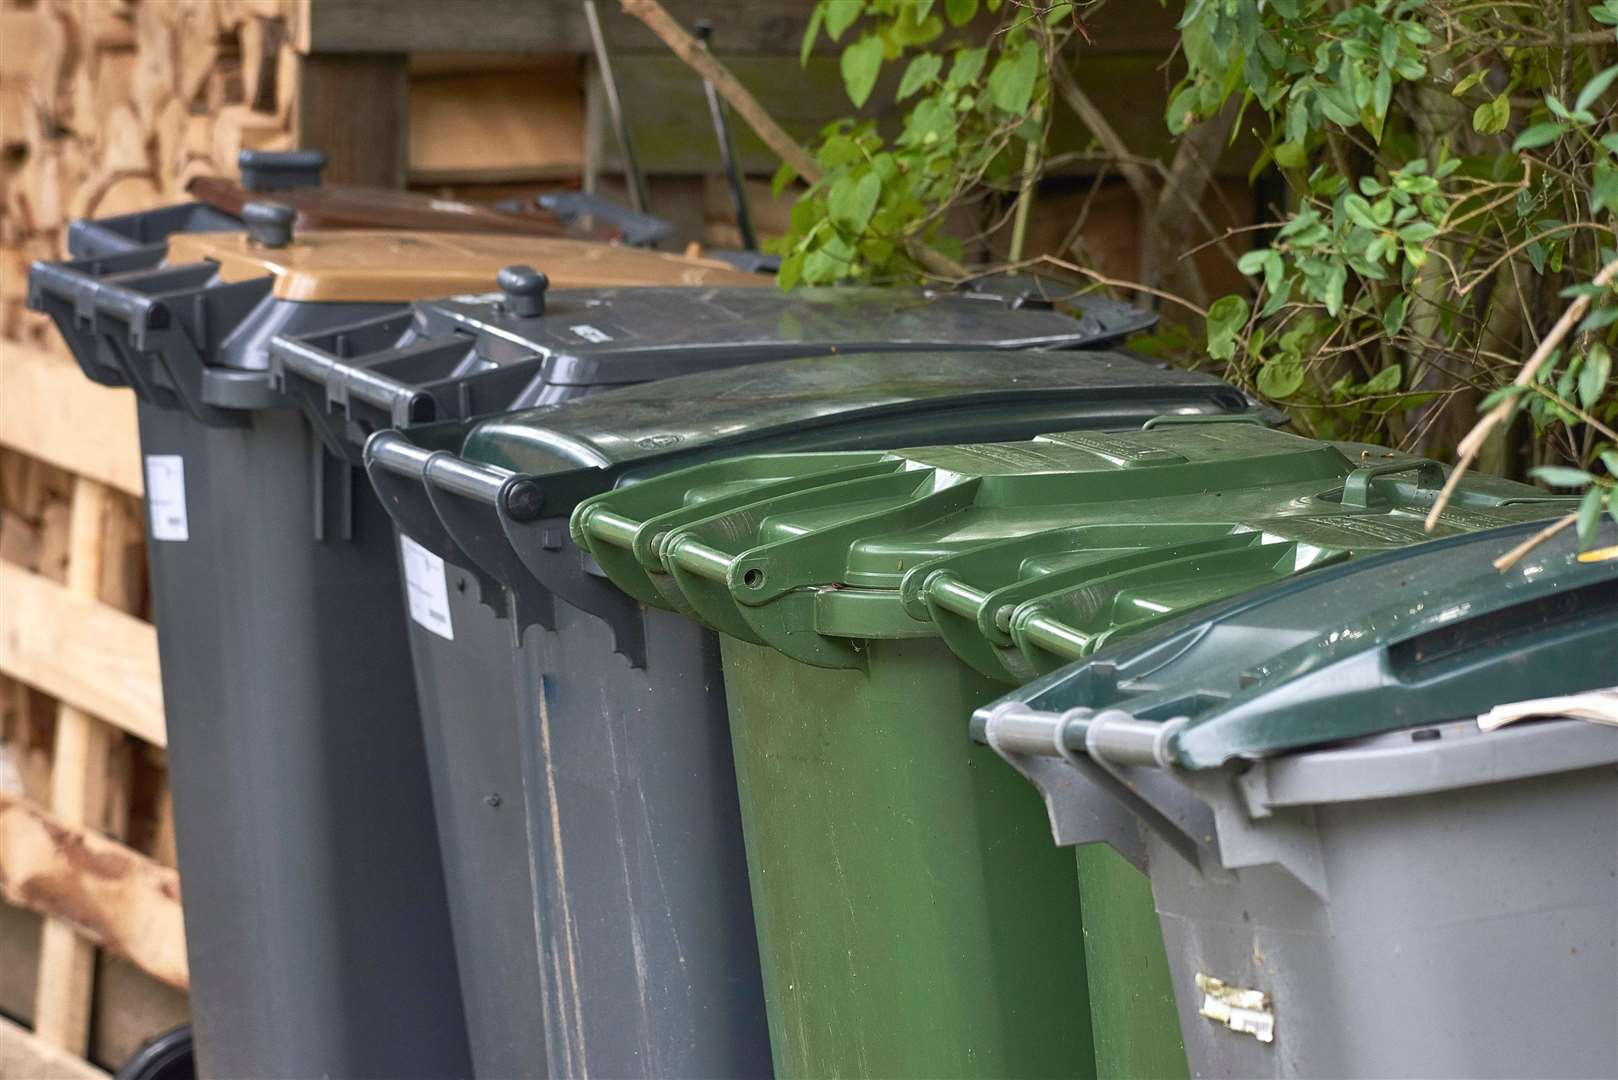 The plans would allow councils to cut back on the number of bins homes use. Image: iStock.